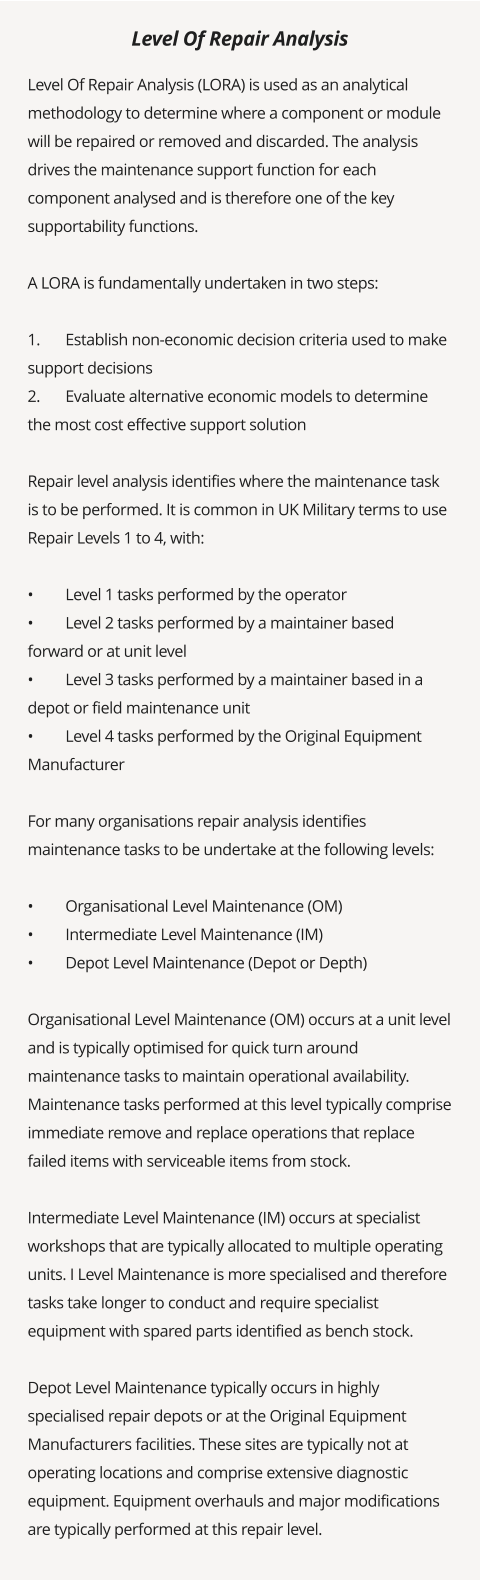 Level Of Repair Analysis (LORA) is used as an analytical methodology to determine where a component or module will be repaired or removed and discarded. The analysis drives the maintenance support function for each component analysed and is therefore one of the key supportability functions.   A LORA is fundamentally undertaken in two steps:  1.	Establish non-economic decision criteria used to make support decisions 2.	Evaluate alternative economic models to determine the most cost effective support solution  Repair level analysis identifies where the maintenance task is to be performed. It is common in UK Military terms to use Repair Levels 1 to 4, with:  •	Level 1 tasks performed by the operator •	Level 2 tasks performed by a maintainer based forward or at unit level •	Level 3 tasks performed by a maintainer based in a depot or field maintenance unit •	Level 4 tasks performed by the Original Equipment Manufacturer  For many organisations repair analysis identifies maintenance tasks to be undertake at the following levels:  •	Organisational Level Maintenance (OM) •	Intermediate Level Maintenance (IM) •	Depot Level Maintenance (Depot or Depth)  Organisational Level Maintenance (OM) occurs at a unit level and is typically optimised for quick turn around maintenance tasks to maintain operational availability. Maintenance tasks performed at this level typically comprise immediate remove and replace operations that replace failed items with serviceable items from stock.   Intermediate Level Maintenance (IM) occurs at specialist workshops that are typically allocated to multiple operating units. I Level Maintenance is more specialised and therefore tasks take longer to conduct and require specialist equipment with spared parts identified as bench stock.  Depot Level Maintenance typically occurs in highly specialised repair depots or at the Original Equipment Manufacturers facilities. These sites are typically not at operating locations and comprise extensive diagnostic equipment. Equipment overhauls and major modifications are typically performed at this repair level.   Level Of Repair Analysis